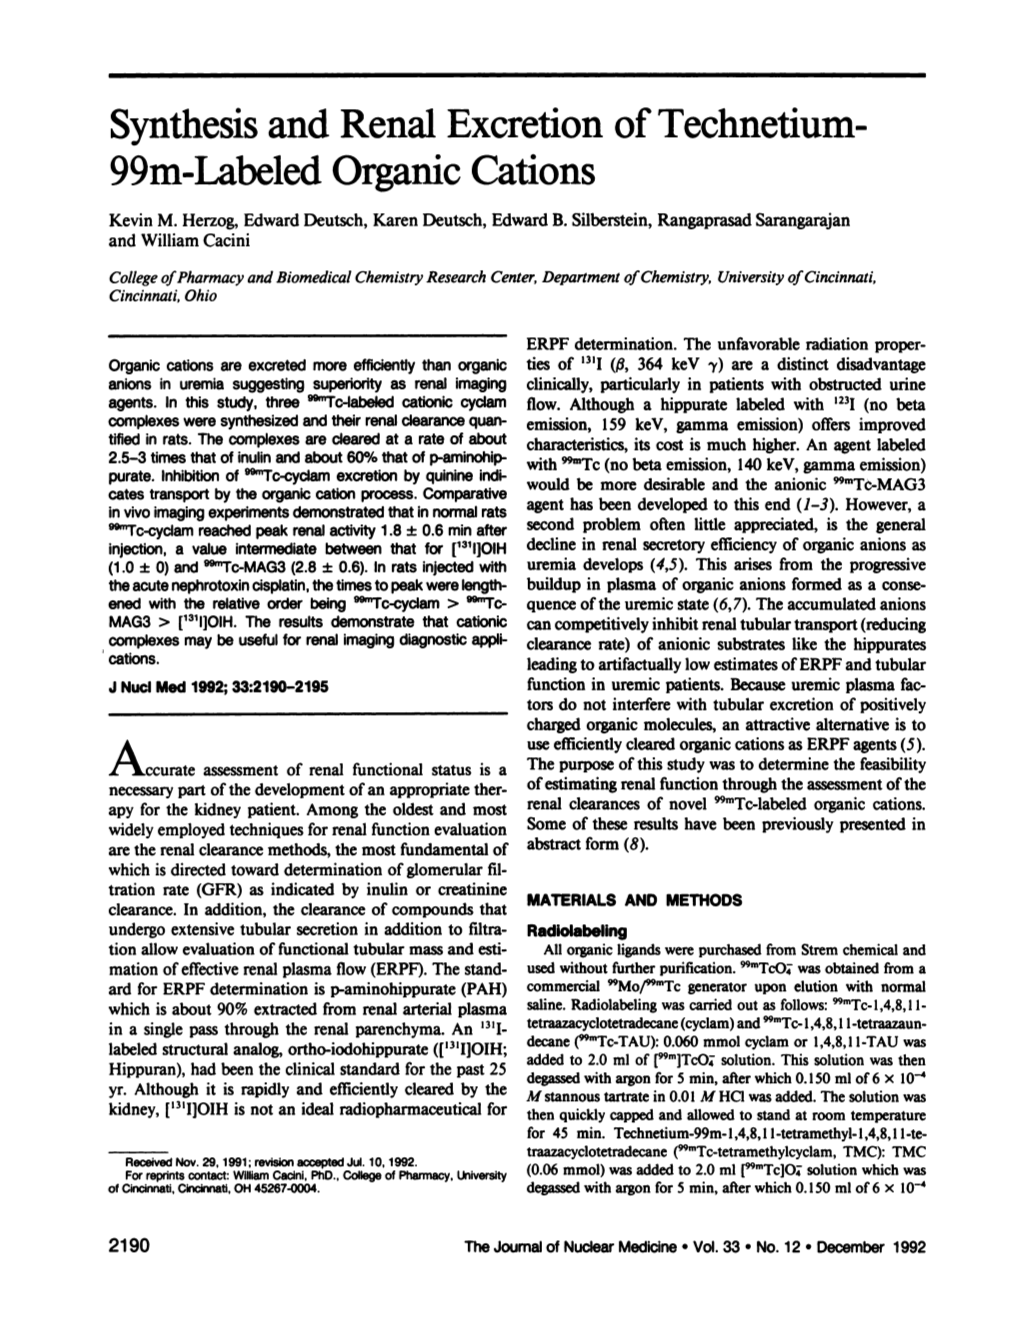 Synthesis and Renal Excretion of Technetium 99M-Labeled Organic Cations